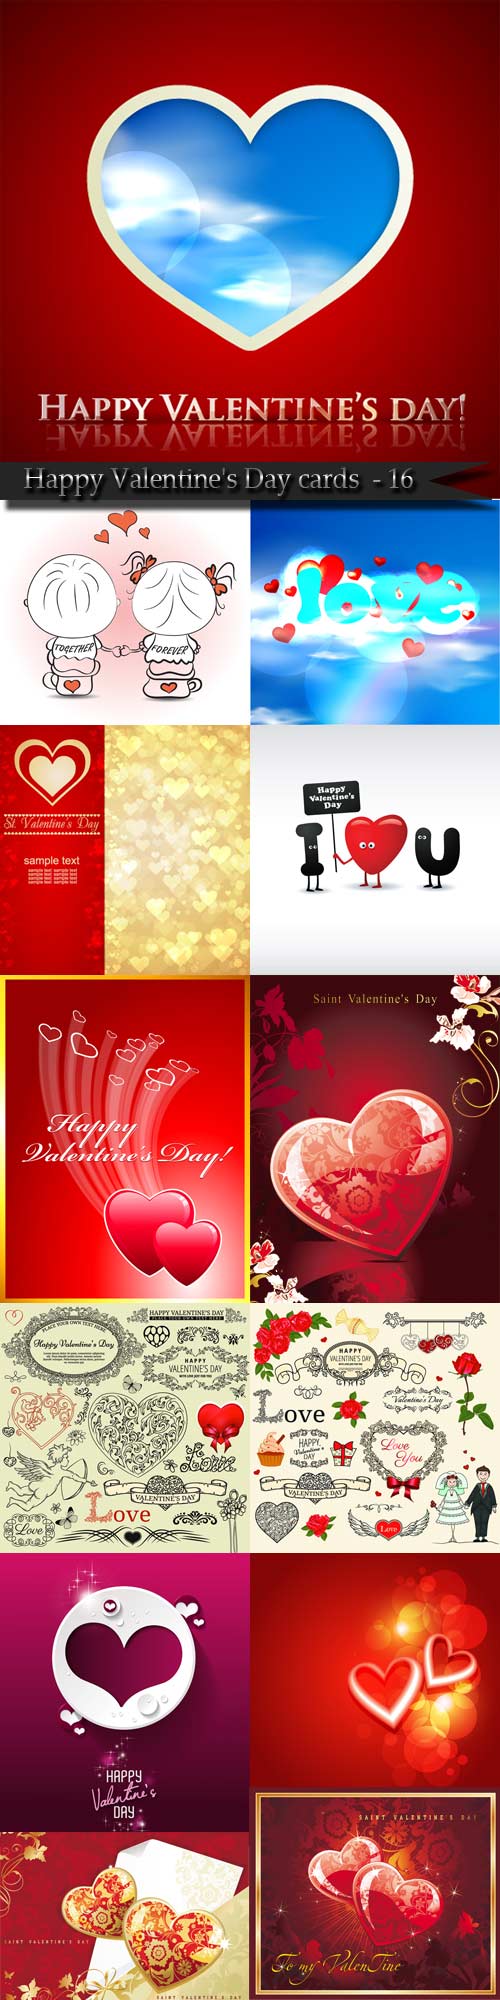 Happy Valentine's Day cards and backgrounds - 16